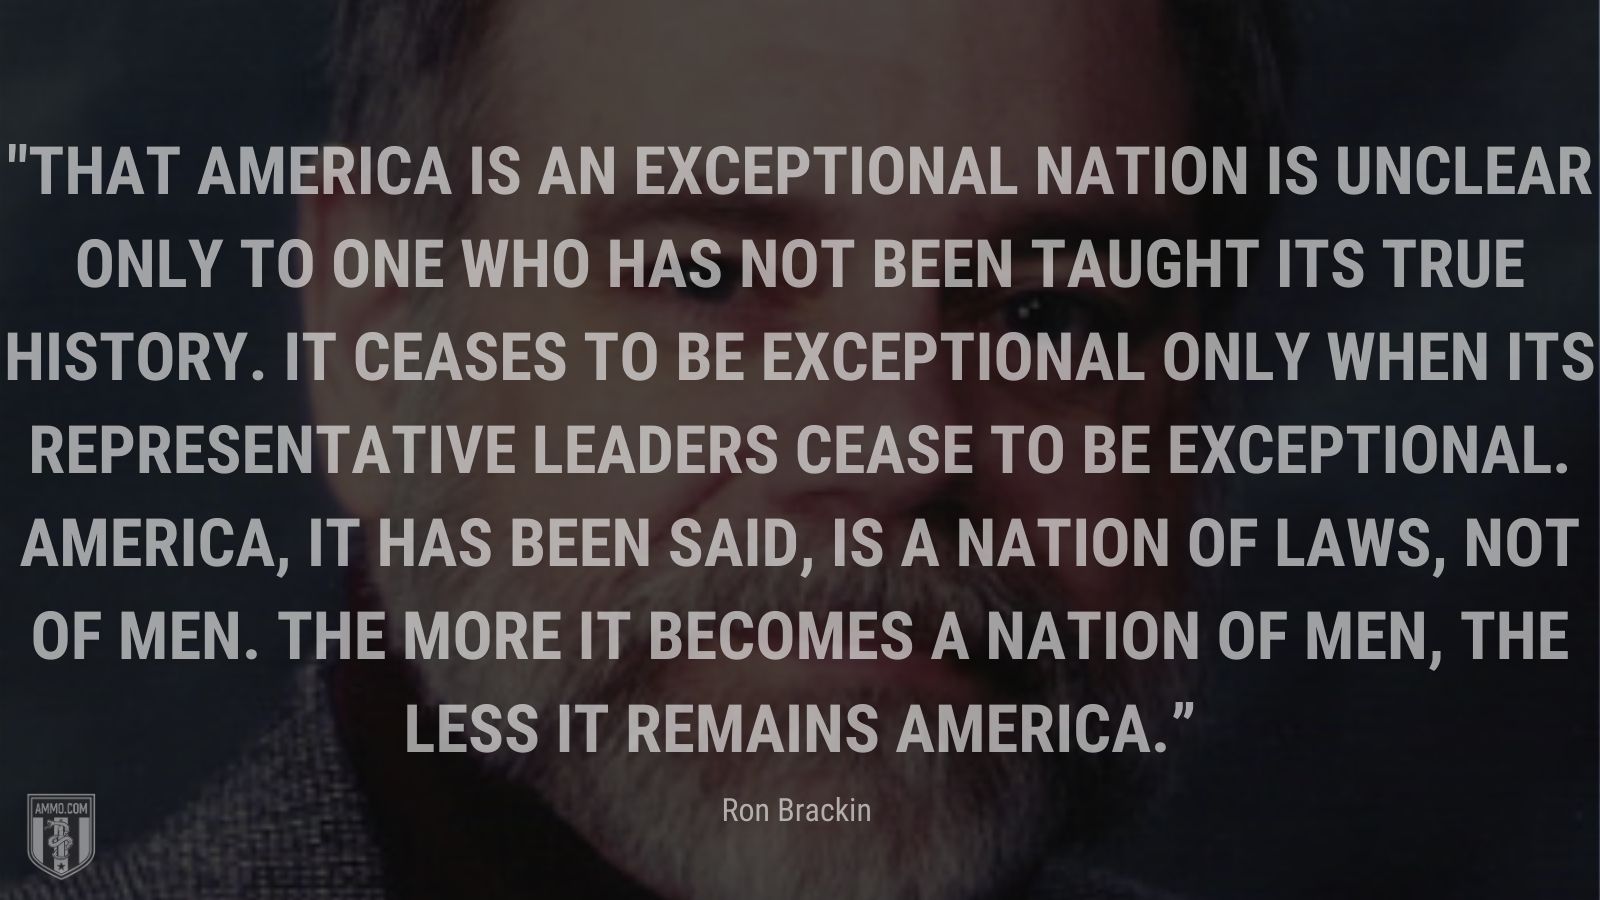 “That America is an exceptional nation is unclear only to one who has not been taught its true history. It ceases to be exceptional only when its representative leaders cease to be exceptional. America, it has been said, is a nation of laws, not of men. The more it becomes a nation of men, the less it remains America.” - Ron Brackin